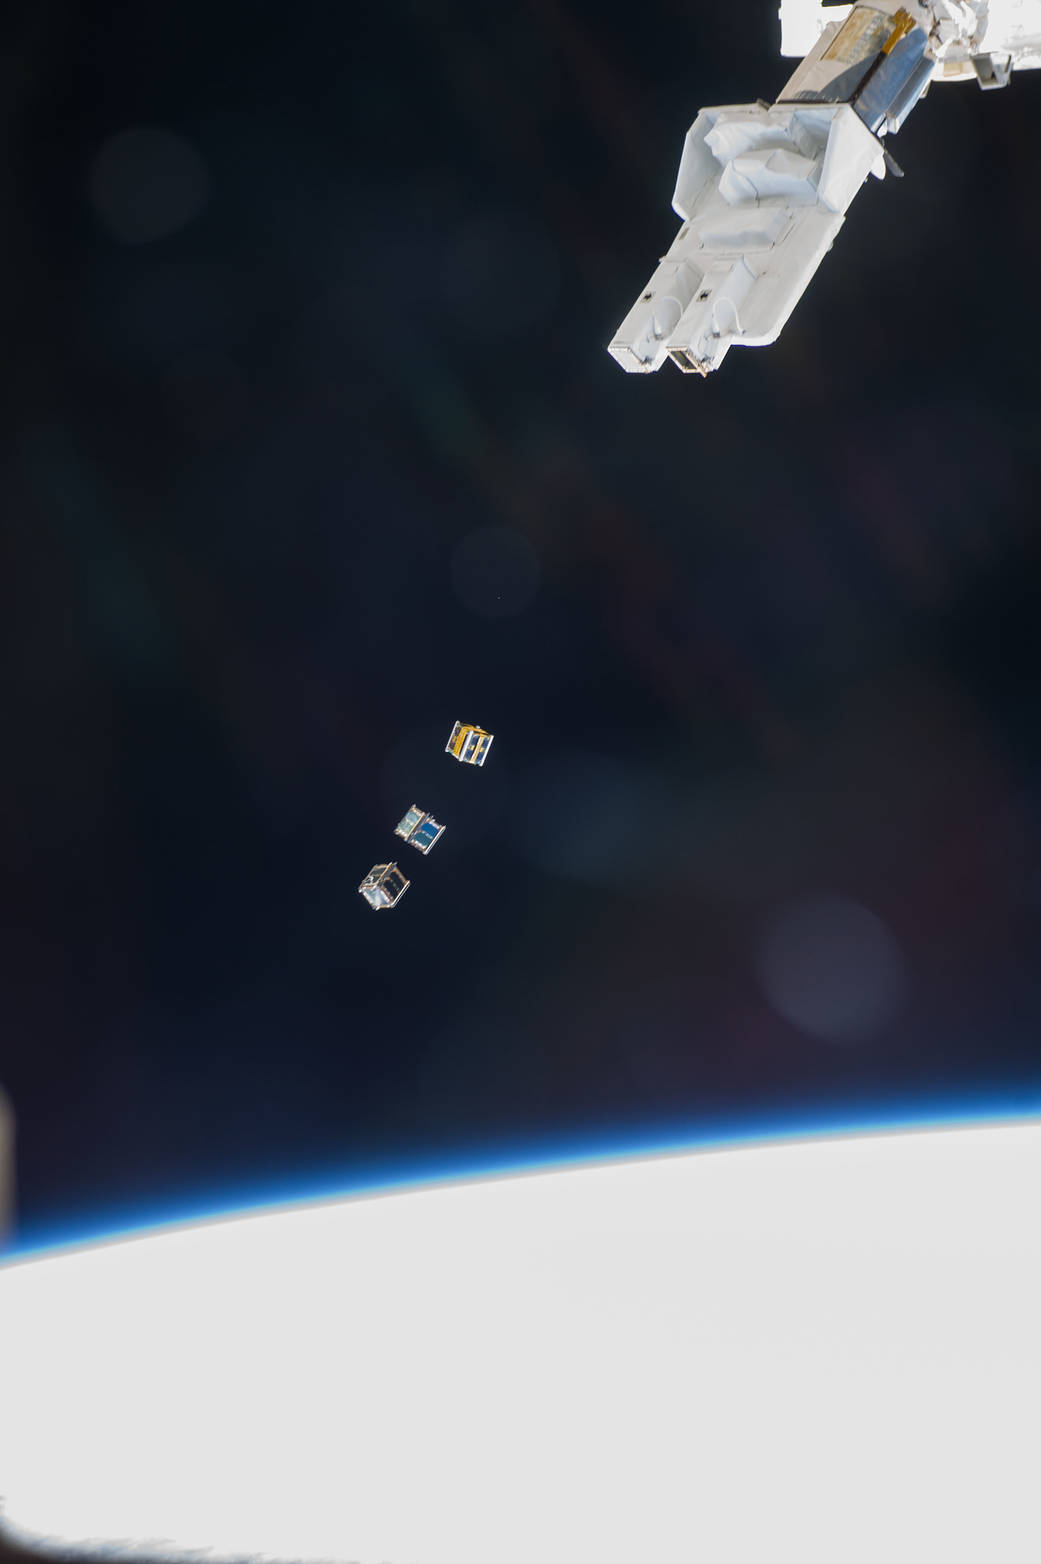 Three nanosatellites, known as Cubesats, are deployed from a Small Satellite Orbital Deployer (SSOD) attached to the Kibo labora